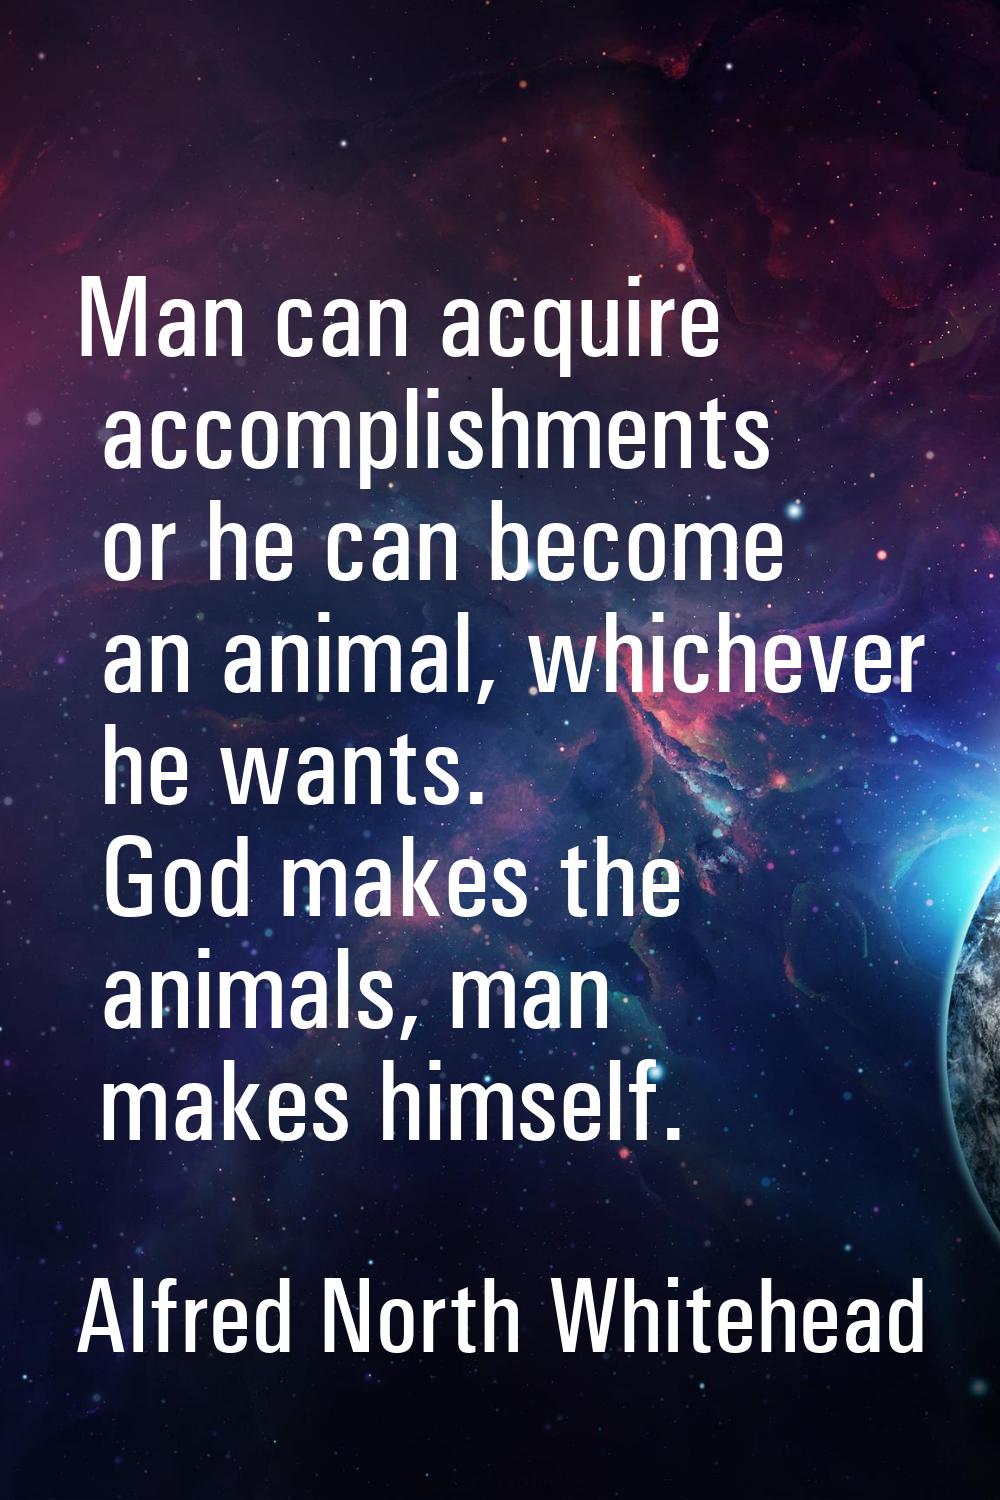 Man can acquire accomplishments or he can become an animal, whichever he wants. God makes the anima